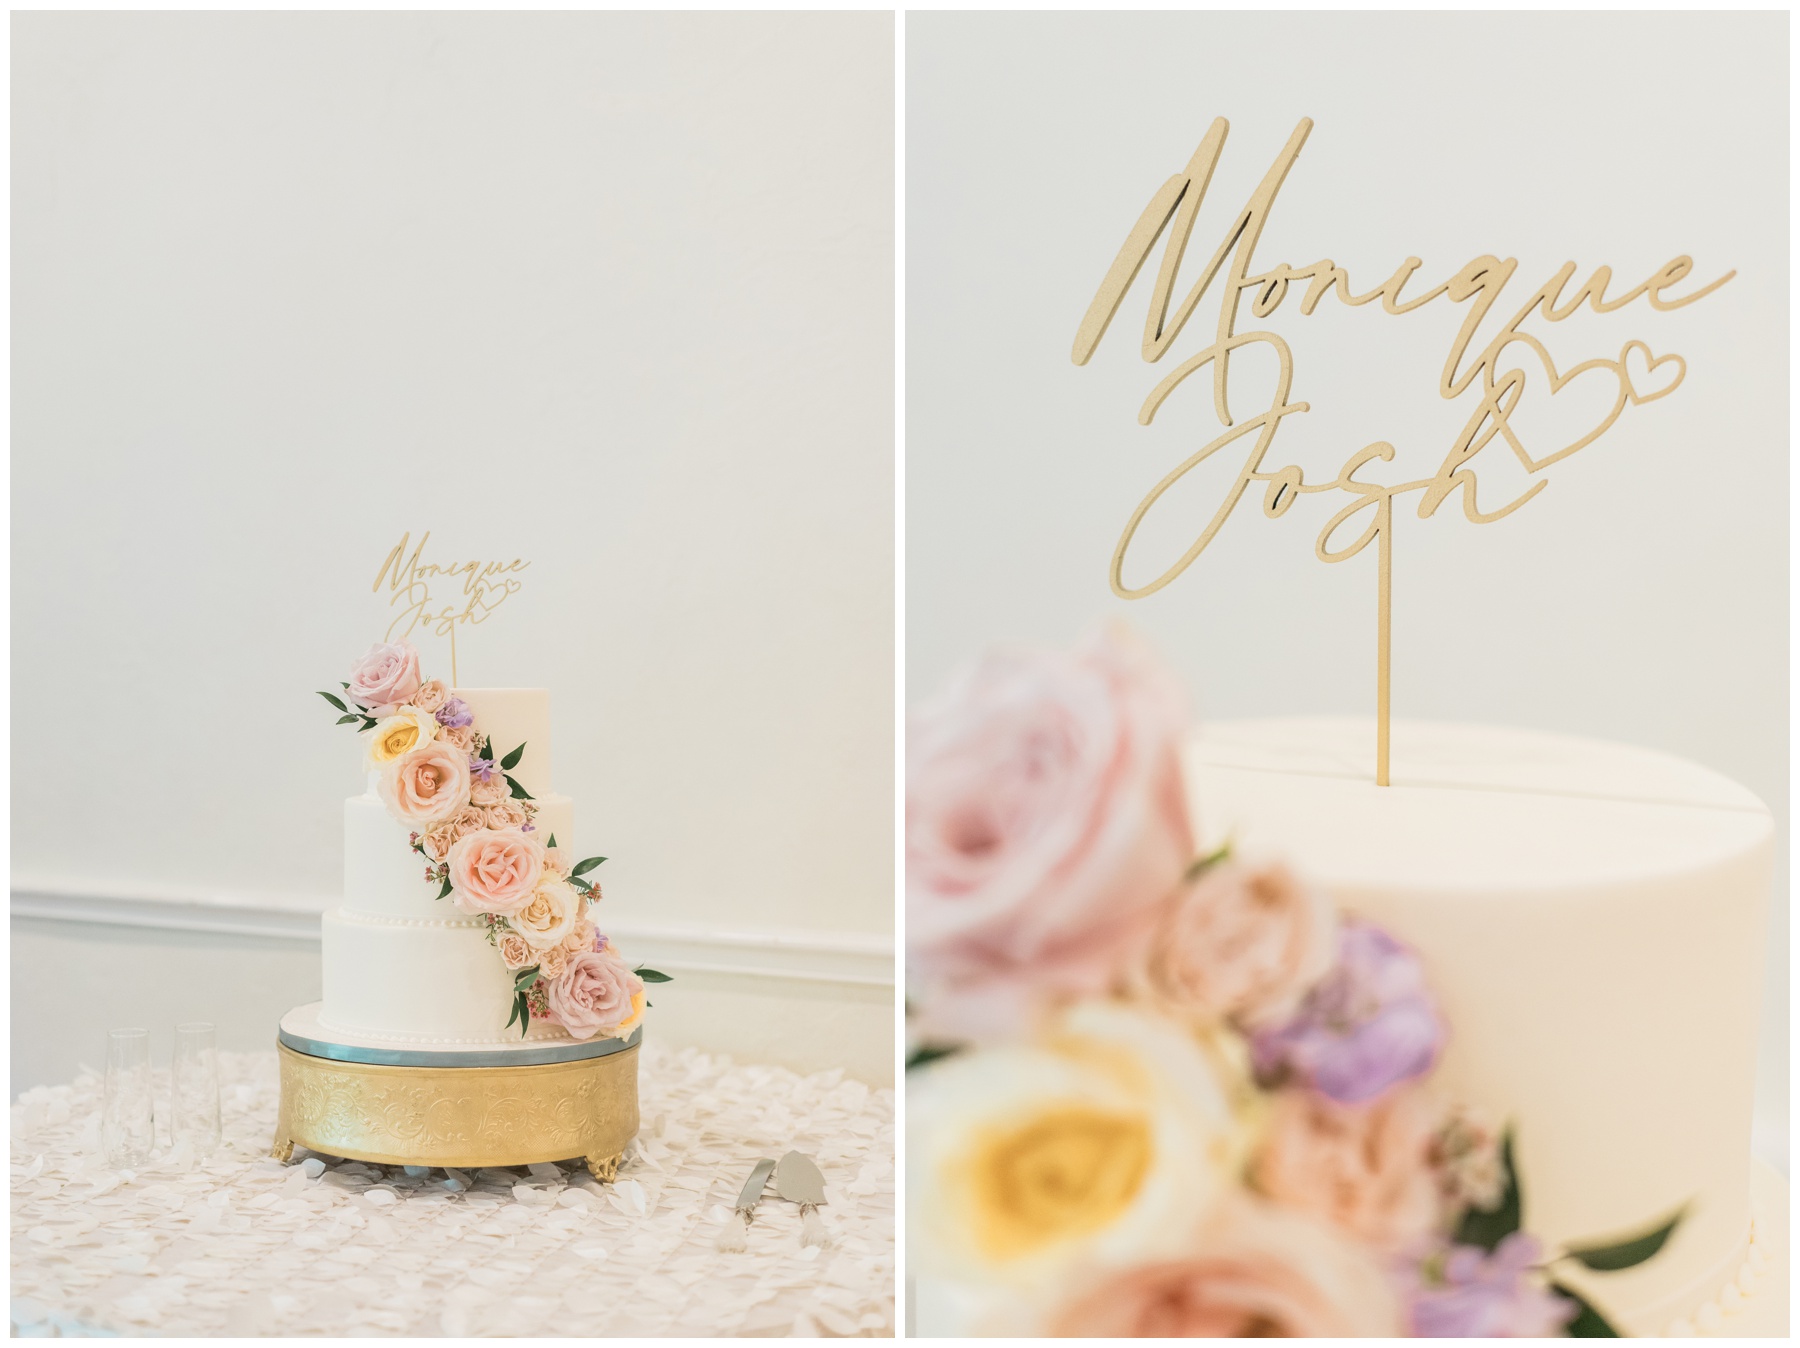 Wedding cake with blush roses and a gold custom topper by Cakes by Gina